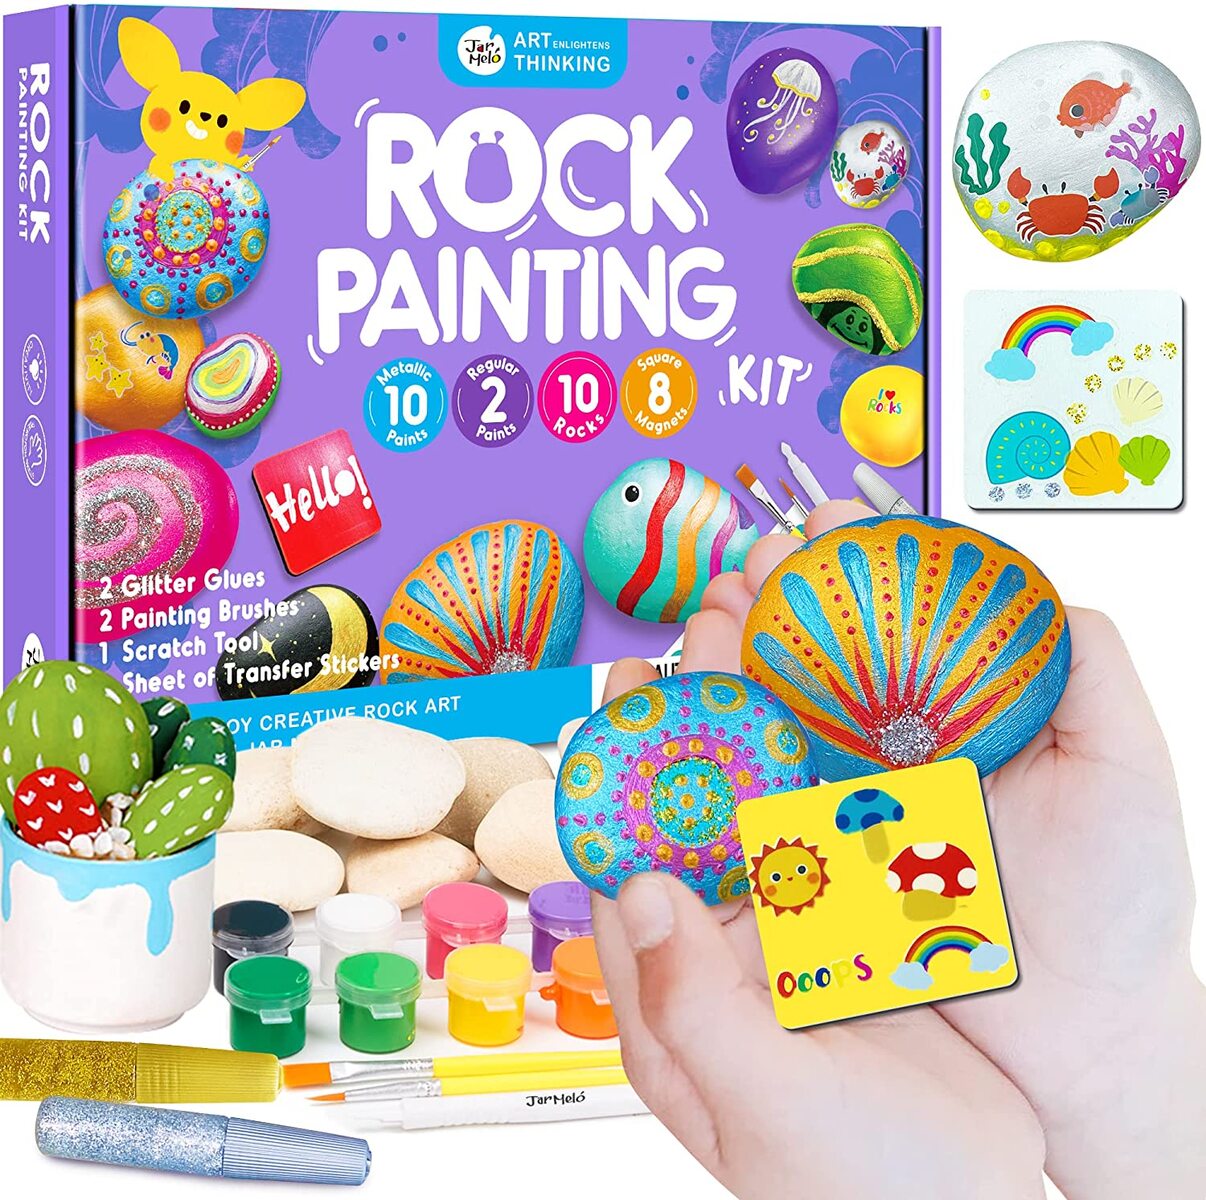 ROCK PAINTING WITH METALLIC PAINTS & GLITTER GLUES CRAFT KIT Deals499